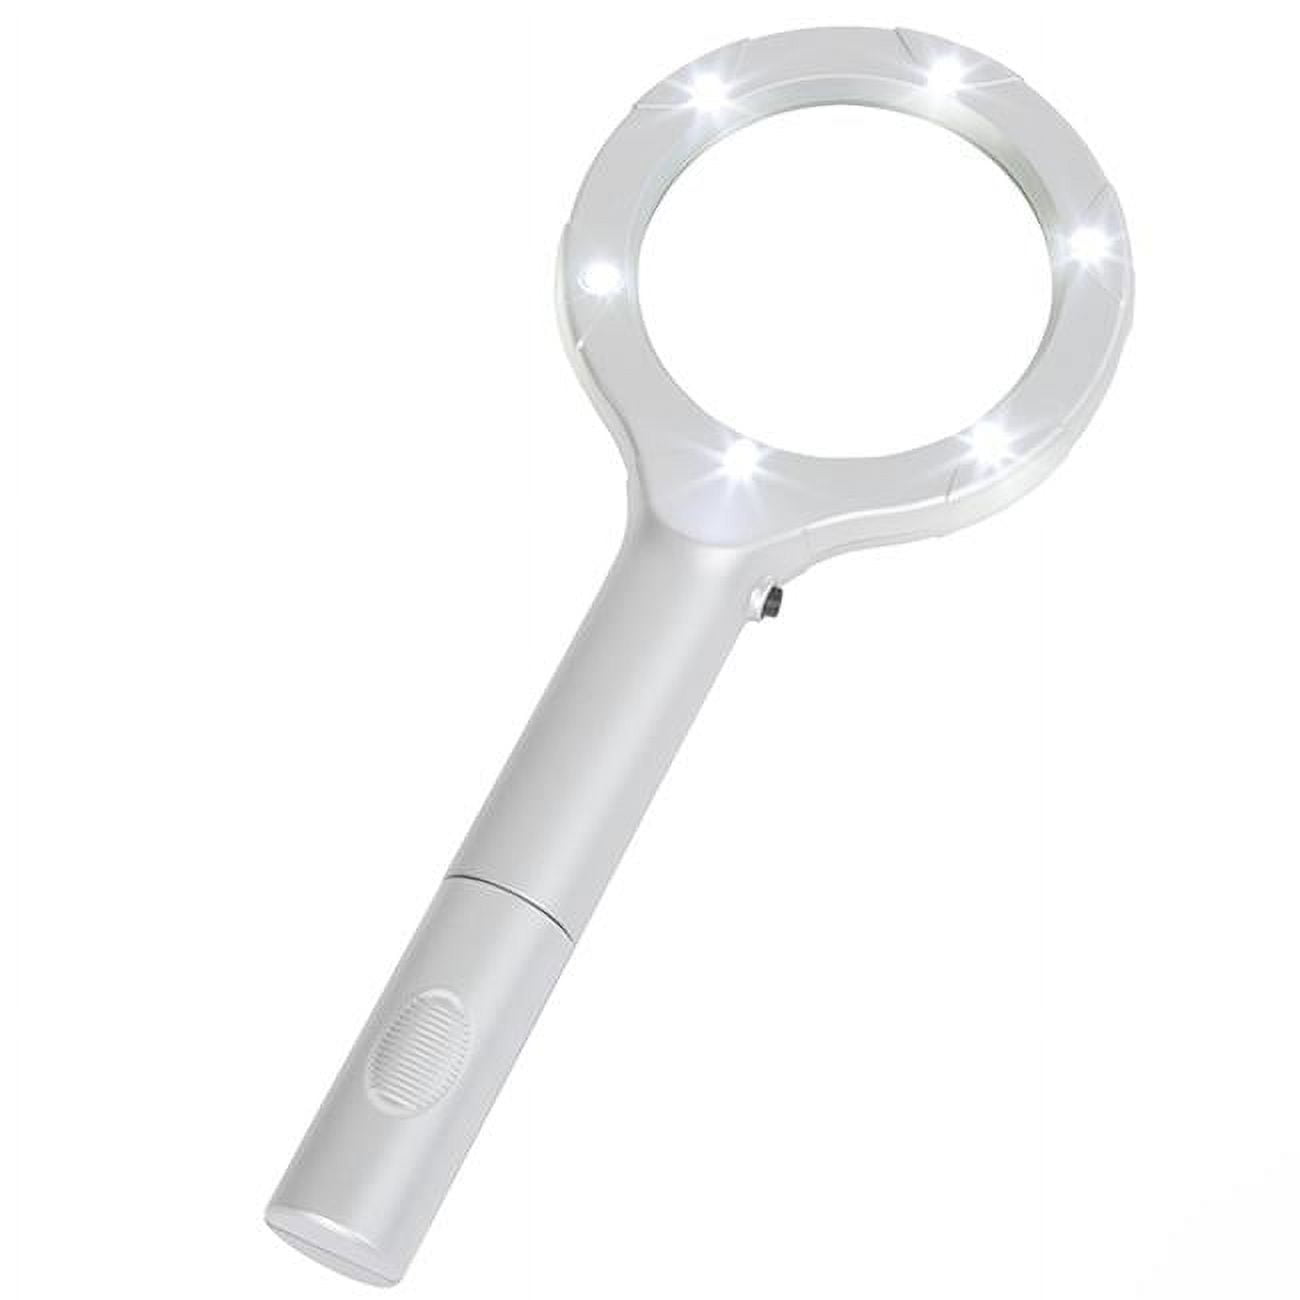 Pocket Magnifying Glass with LED Light, industrial magnifying glass  supplier